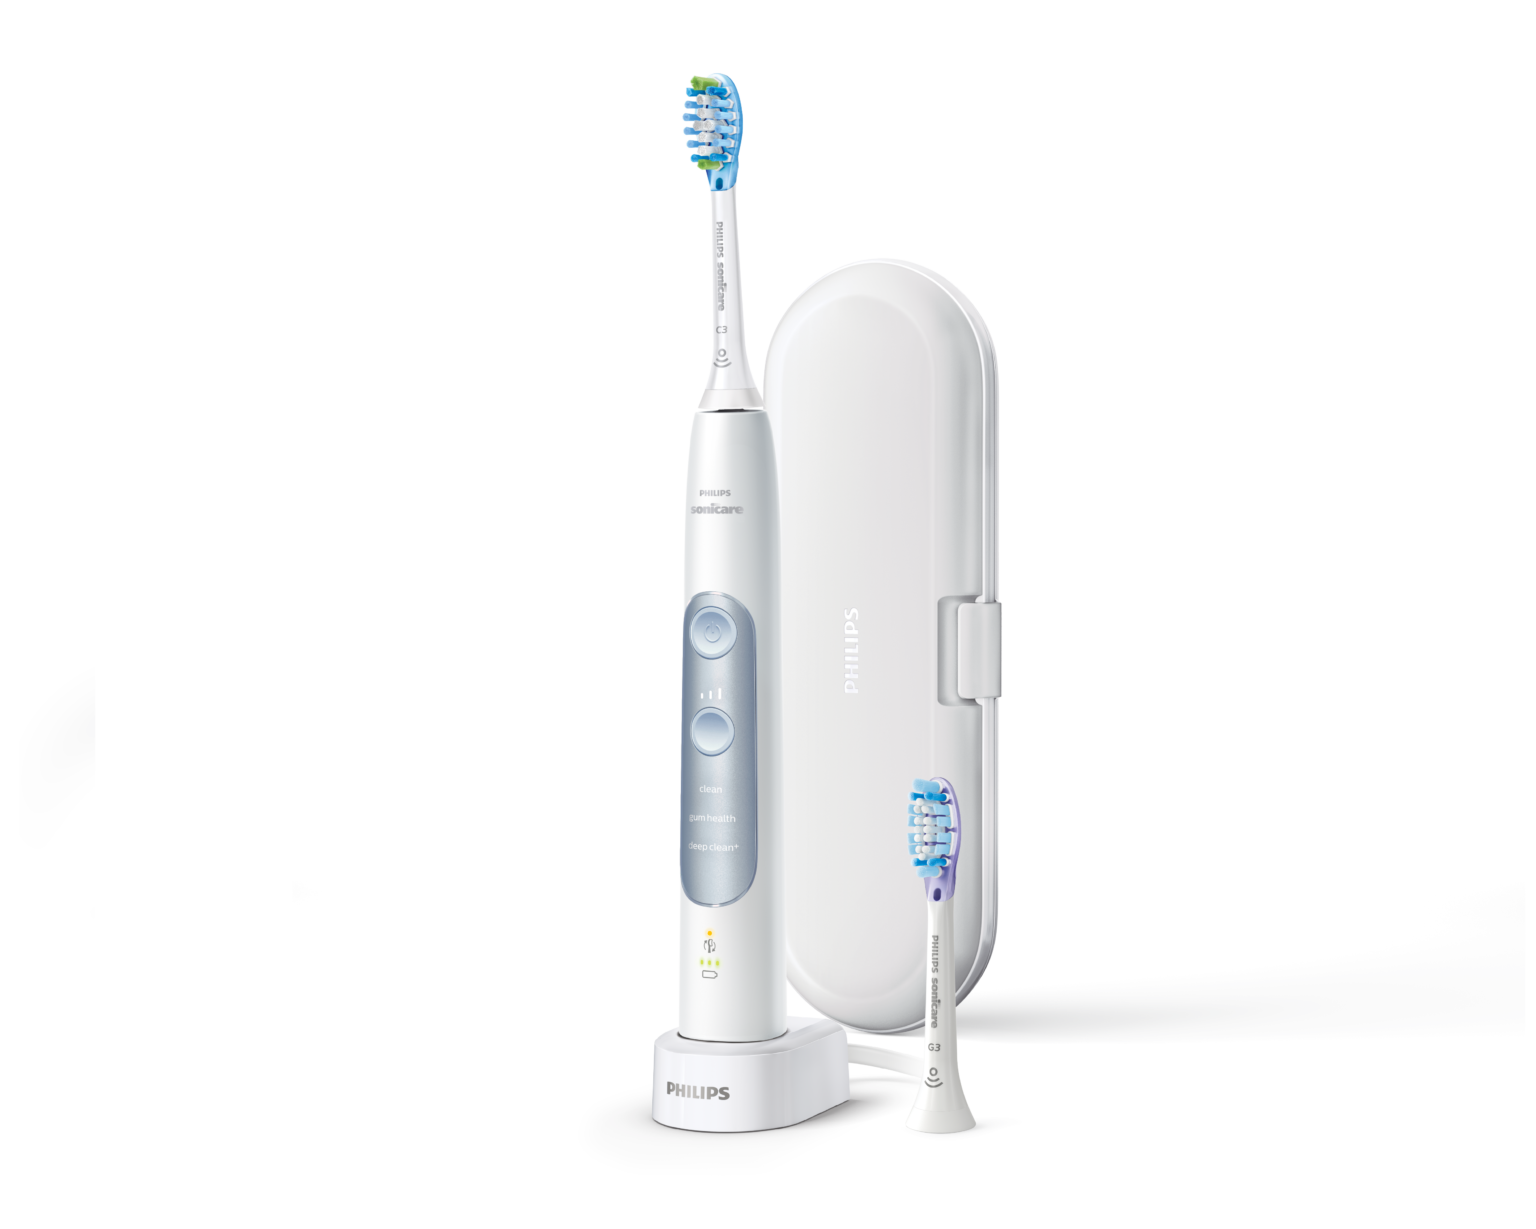 Philips Sonicare PROTECTIVECLEAN 4300. Philips Sonicare PROTECTIVECLEAN 6100. Зубная щетка Philips hx6803. Philips Sonicare PROTECTIVECLEAN 4500.